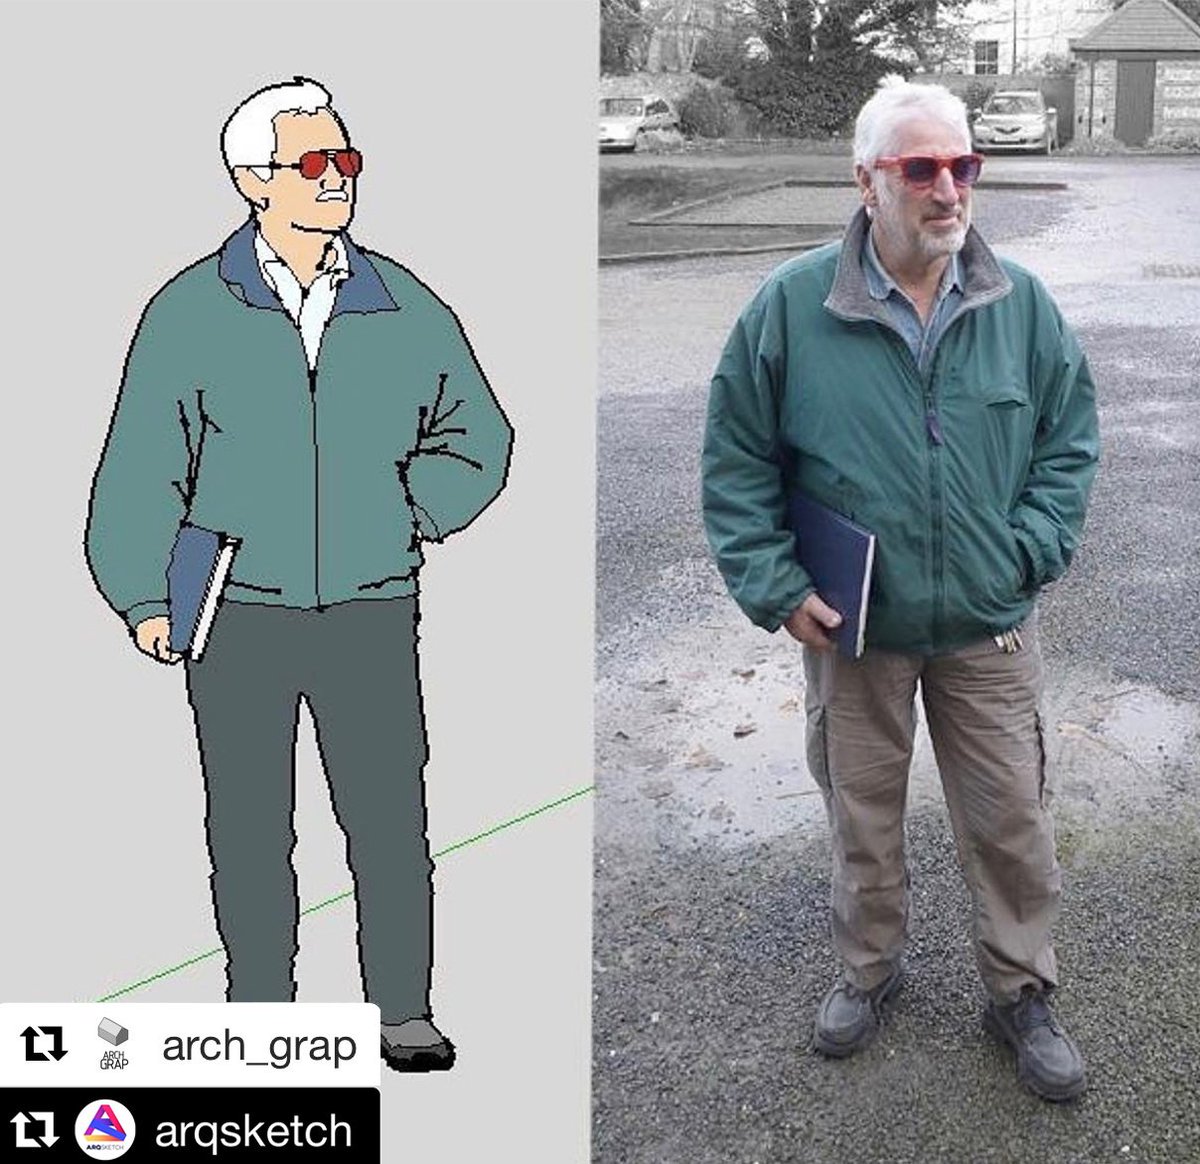 Breaking news... Our very own Phil Easton has become a hit over the weekend! Check out his fame on @arqsketch_ and @ArchGrap

#sketchup @SketchUp #phil #steve @ArchitectureSW #sketchupman